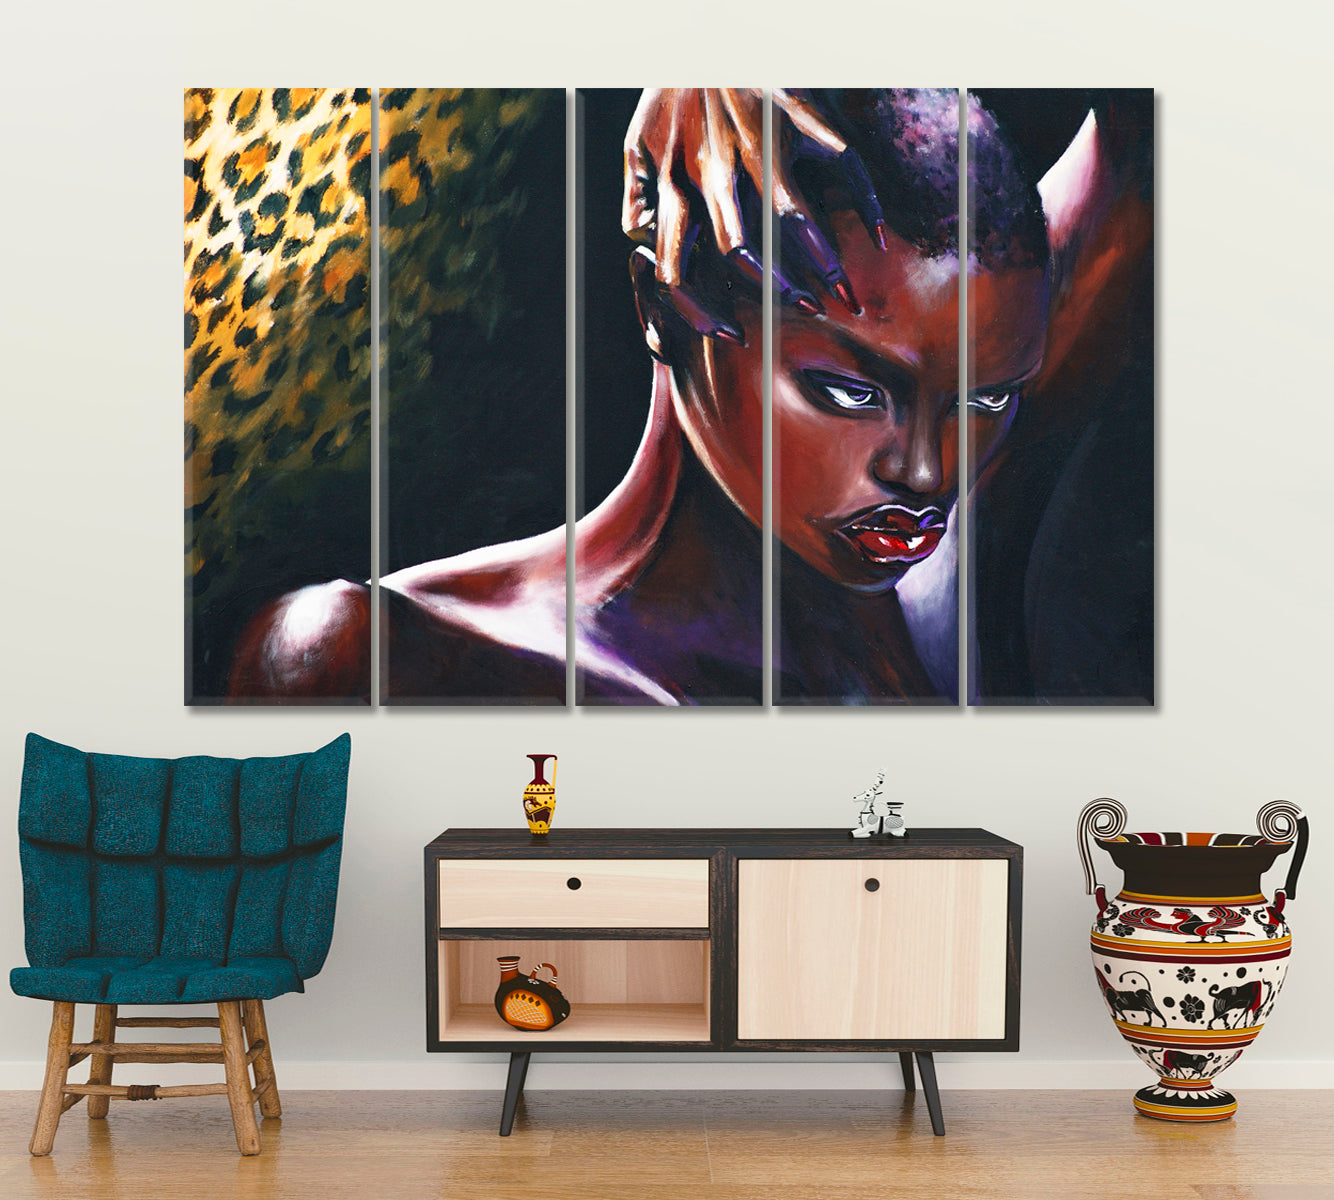 BEAUTY OF BLACK Stunning Beautiful African Woman Contemporary African Style Canvas Print Artesty 5 panels 36" x 24" 